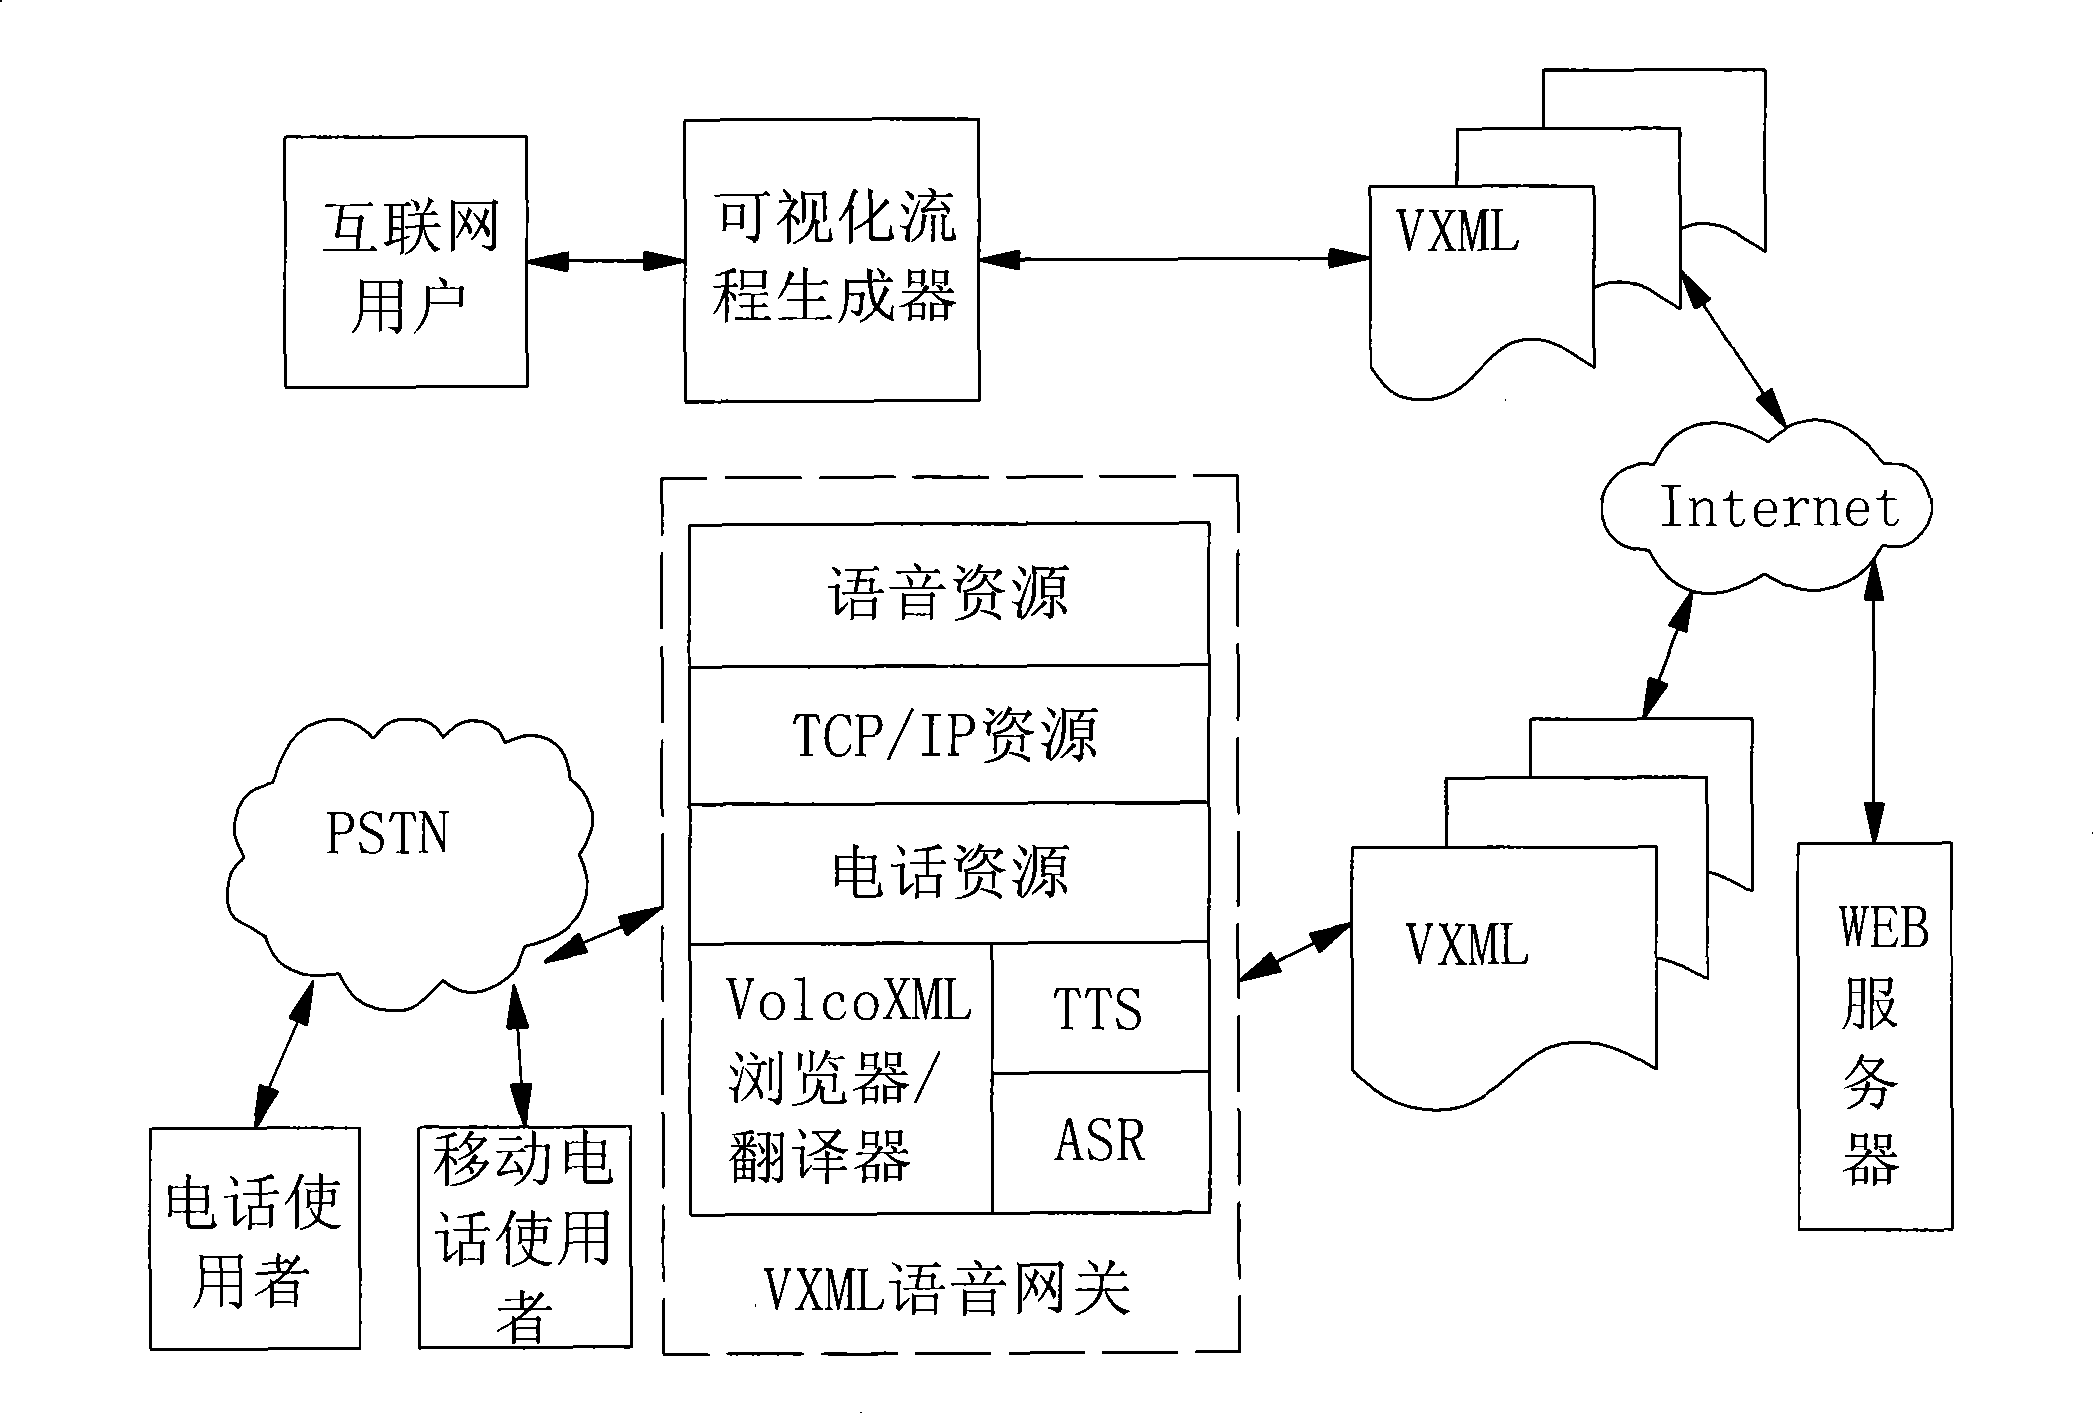 Expandable interactive voice service system based on wideband network